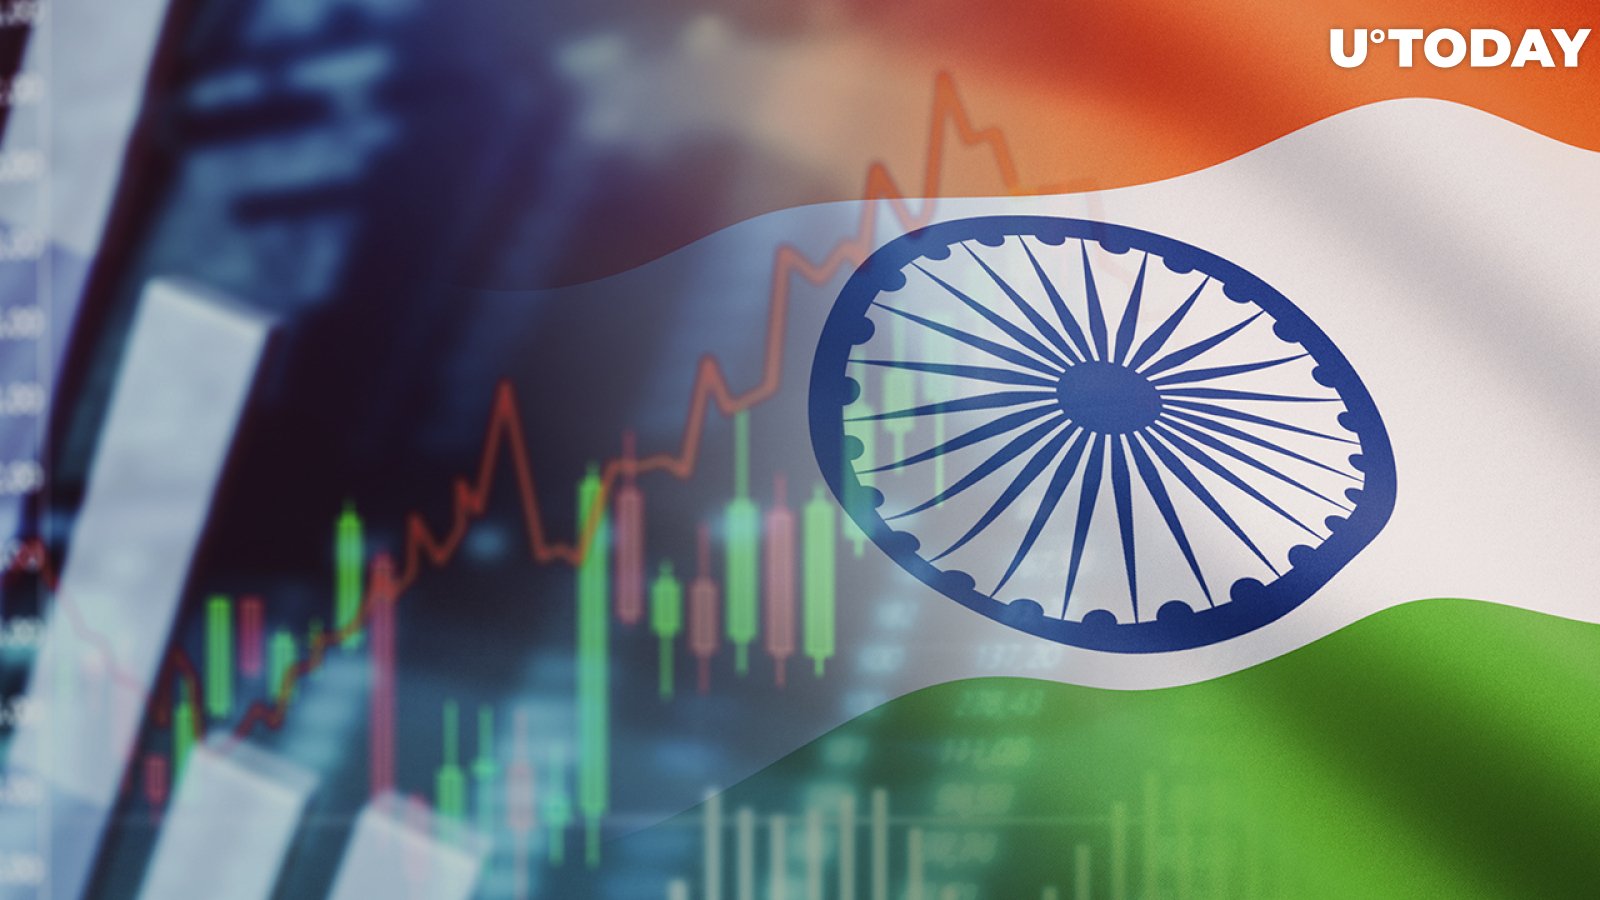 Major Indian Crypto Exchanges Blocked All Transfers and Deposits: Details